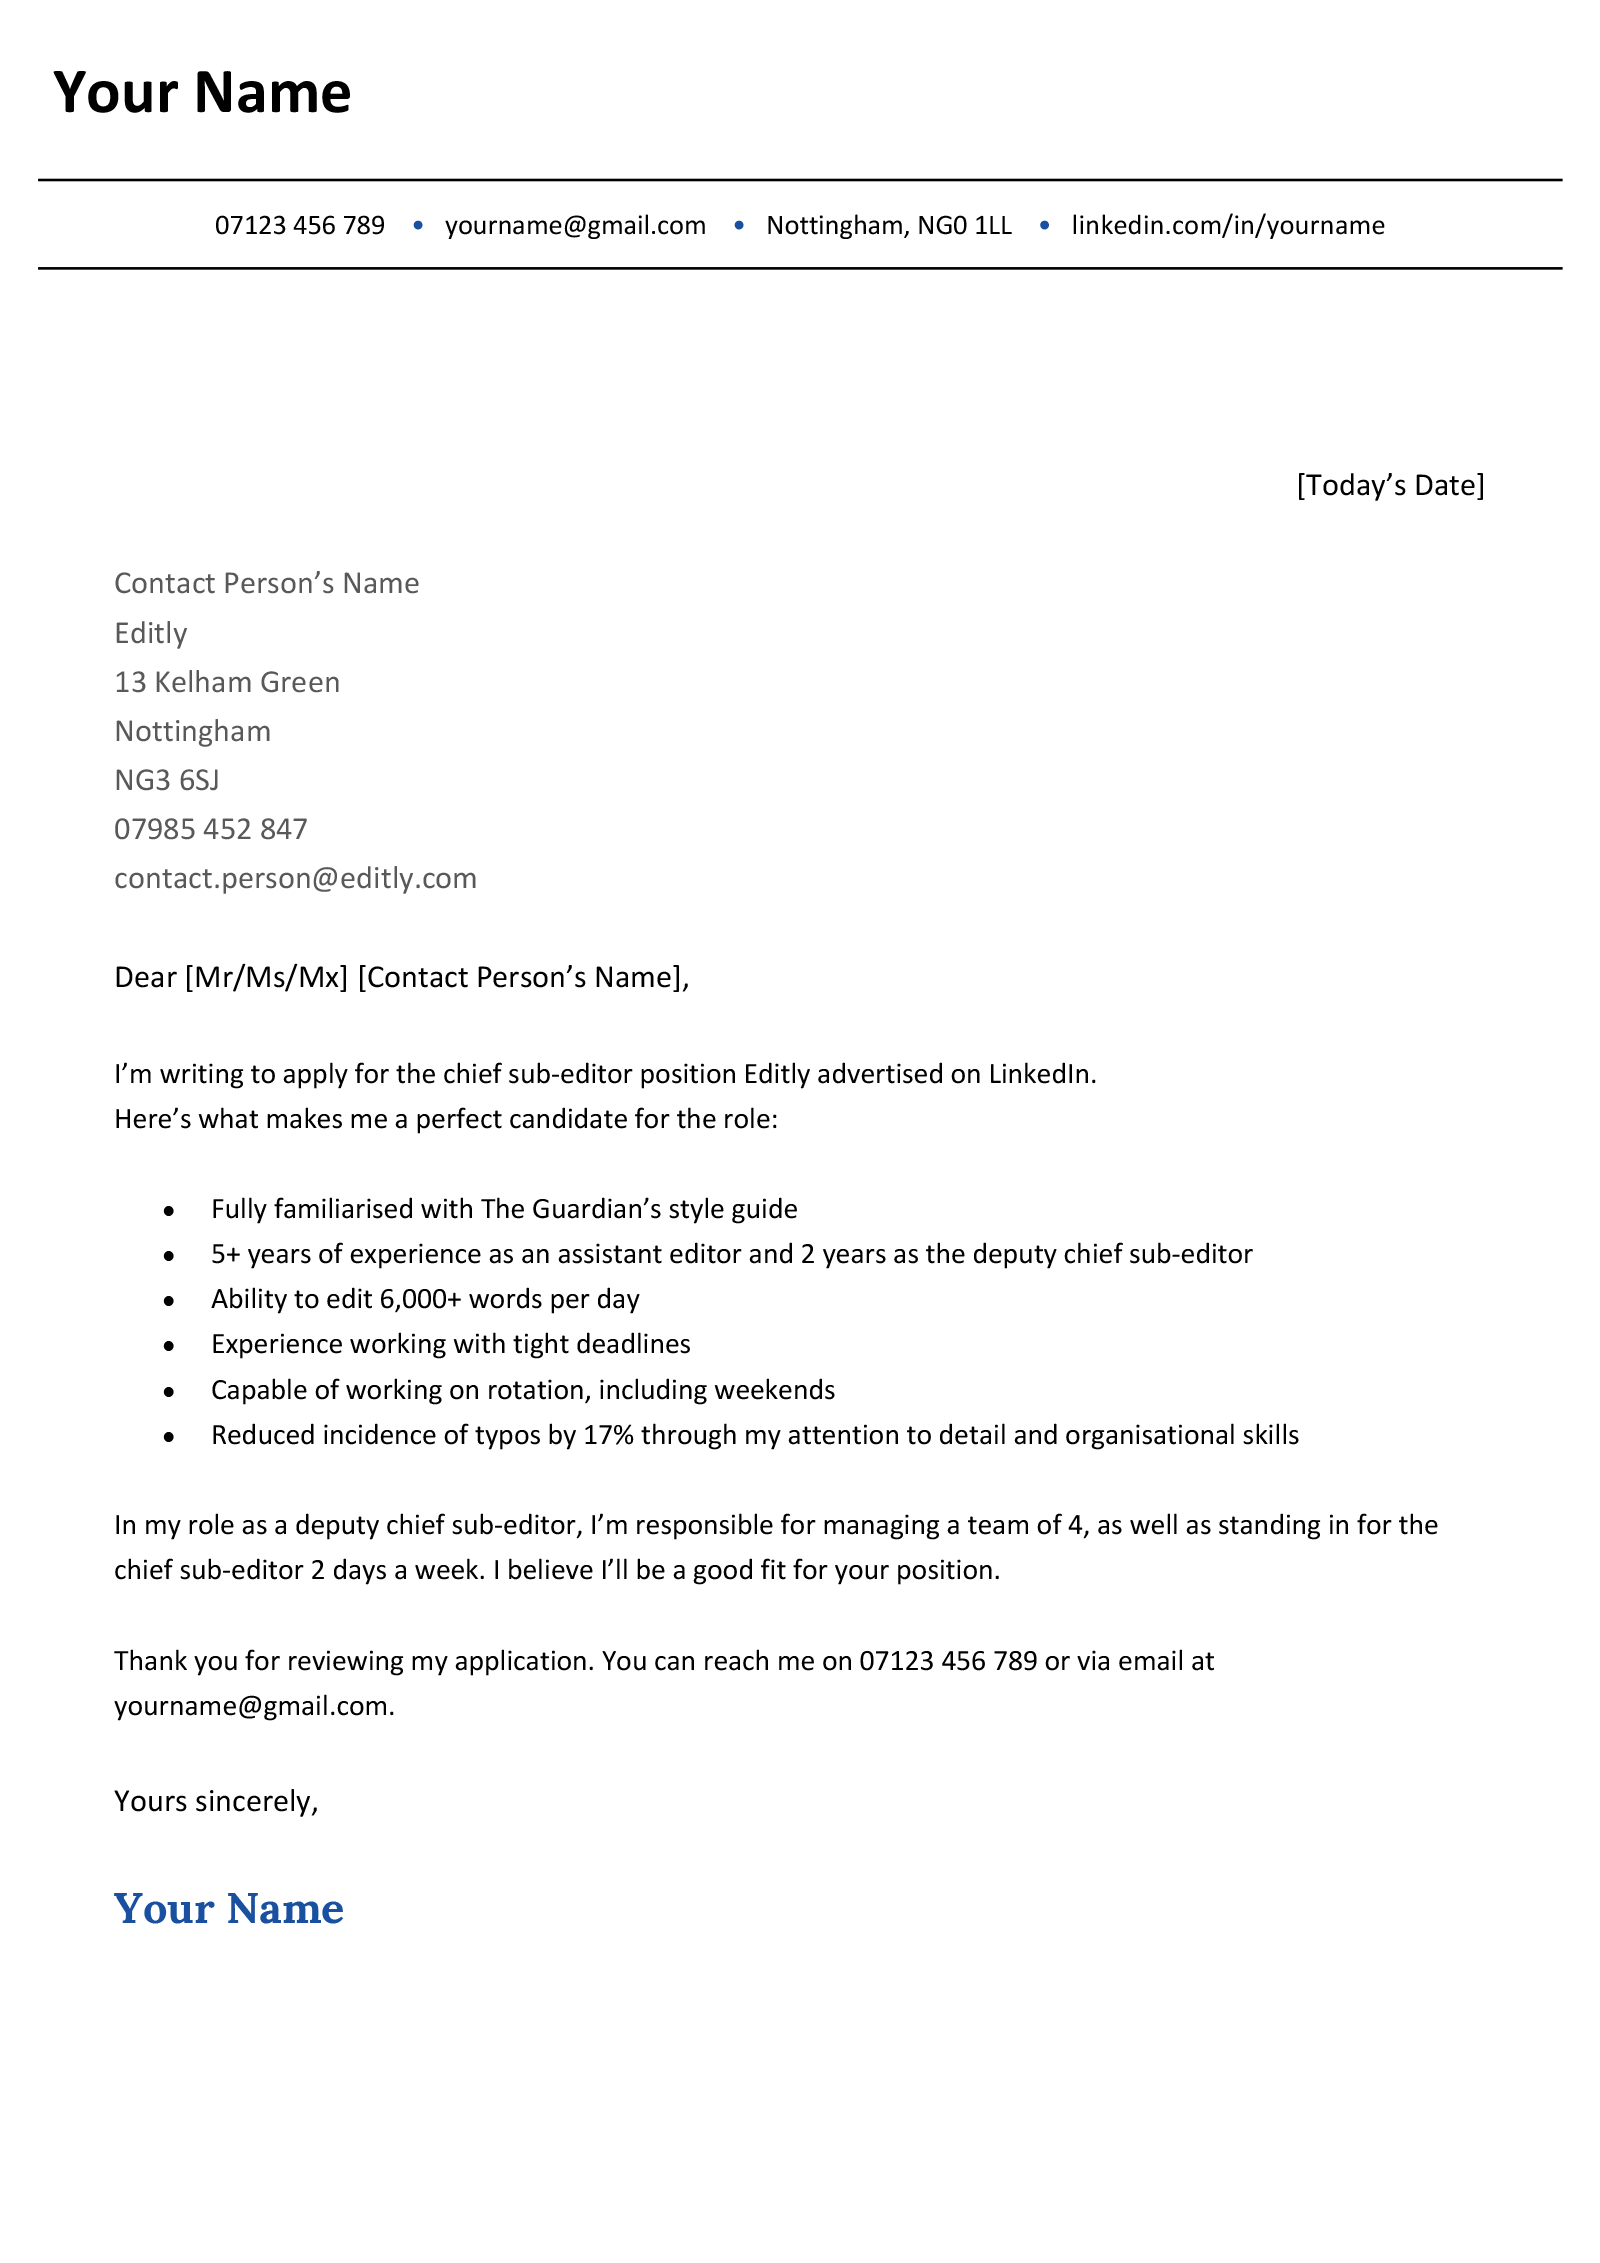 A short cover letter sample for an editor position with a bulleted list to briefly summarise the applicant's key achievements.